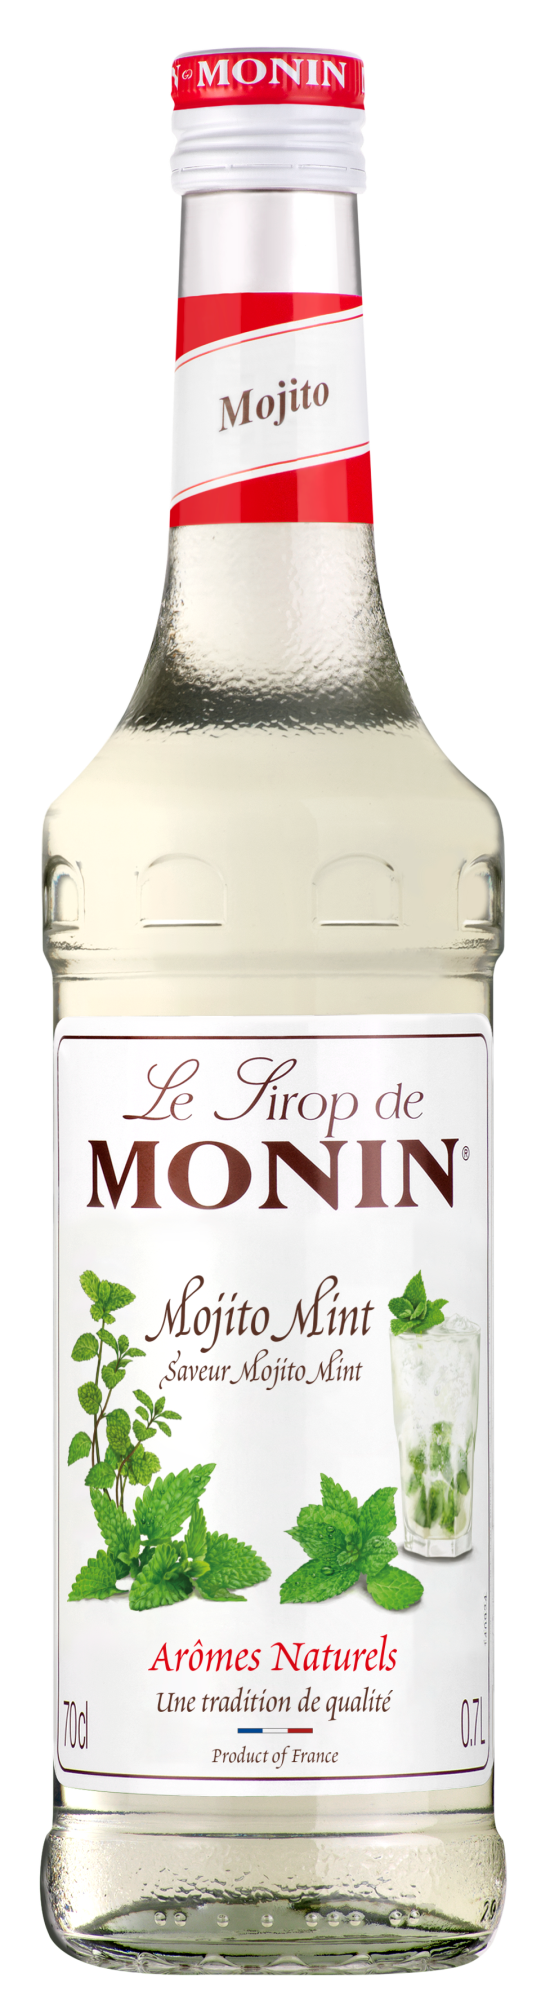 Buy MONIN Mojito Mint Syrup. It captures the perfect balance of lime and mint. It can be combined in lemonades, iced teas.